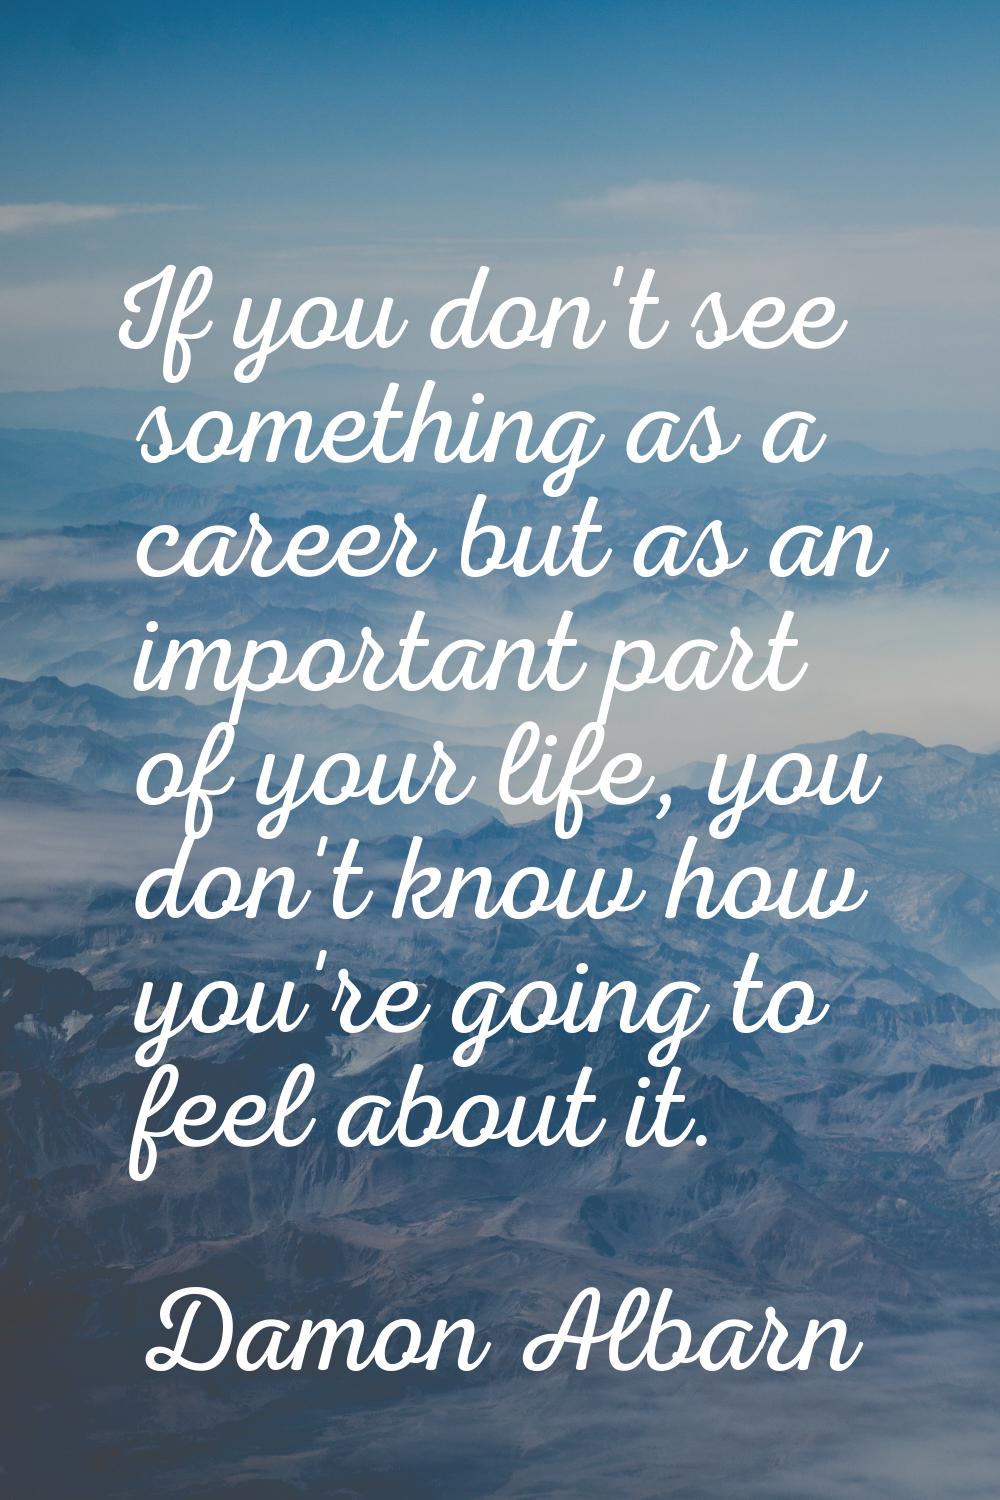 If you don't see something as a career but as an important part of your life, you don't know how yo